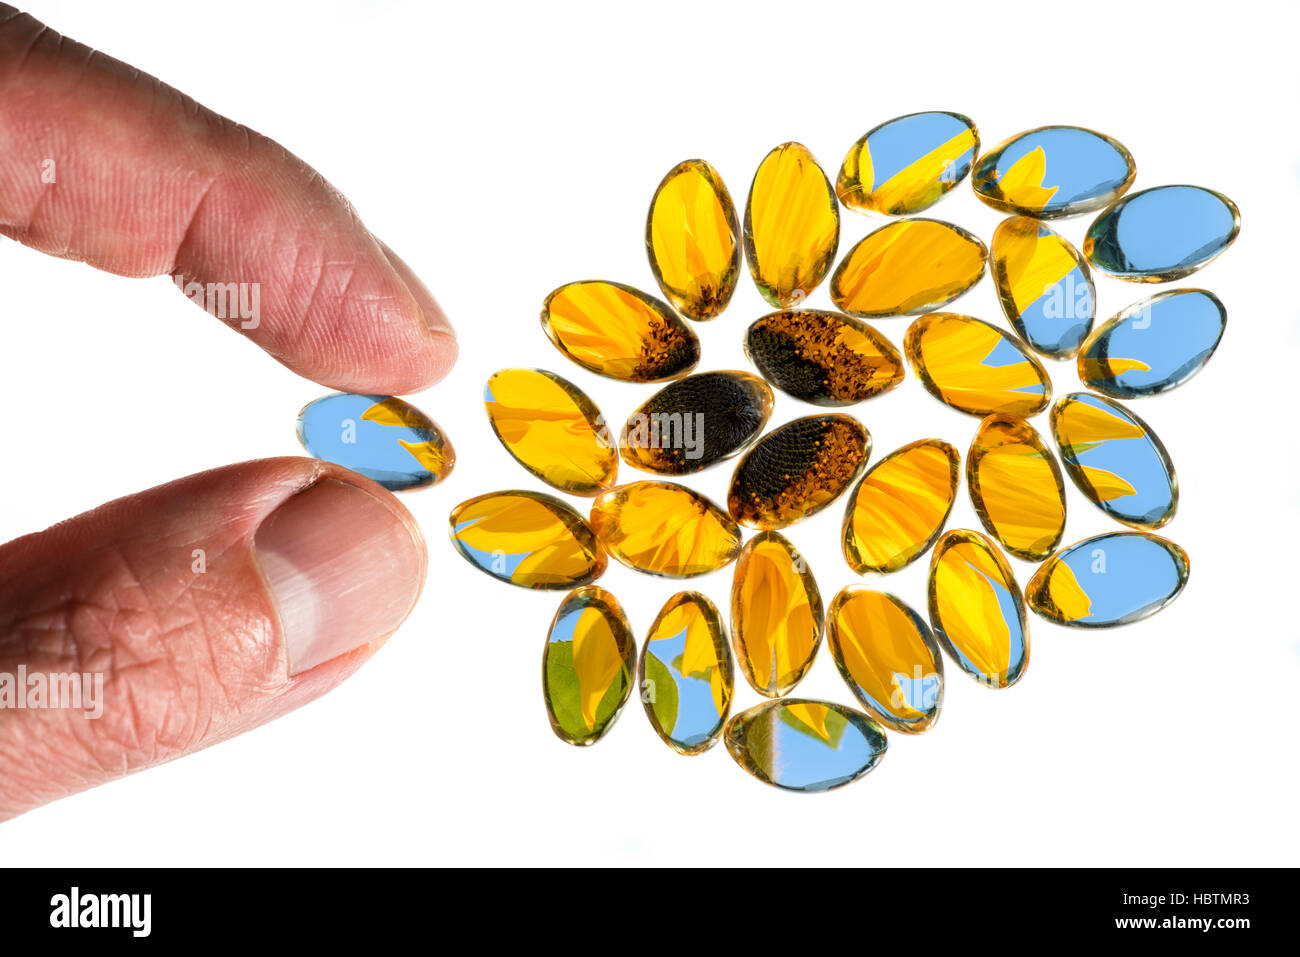 Capsules containing a natural remedy Stock Photo